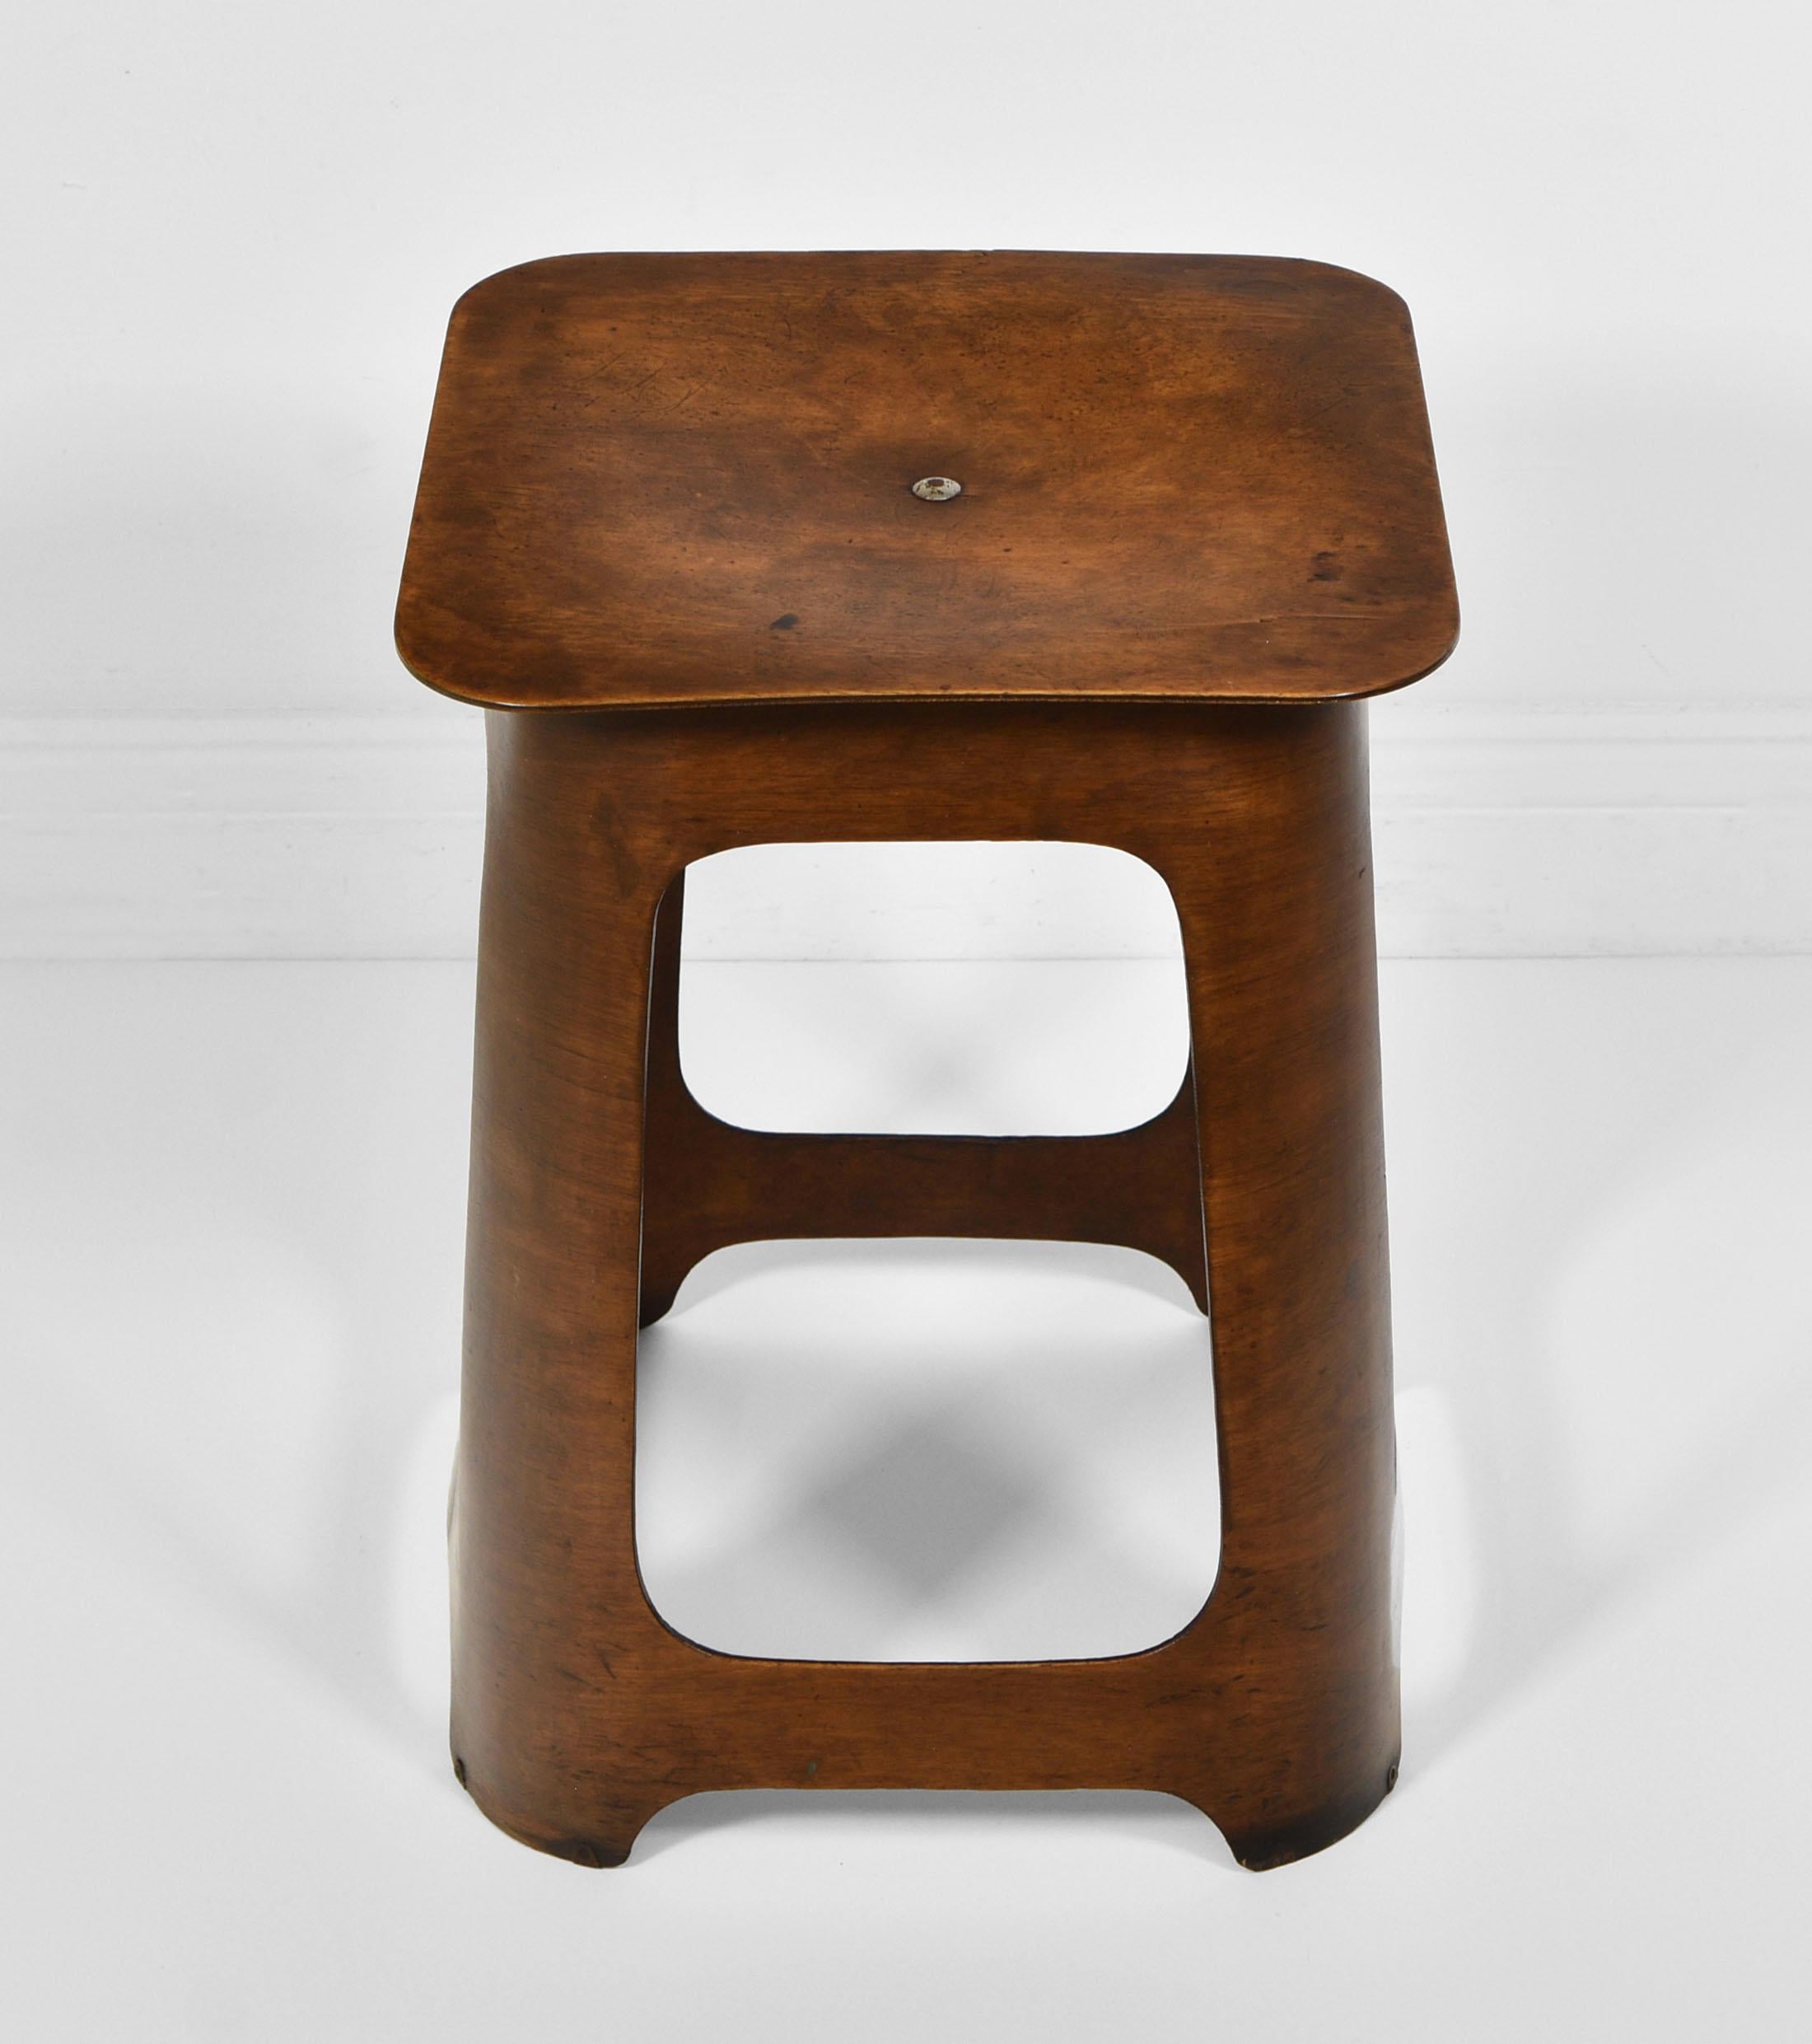 An iconic Isokon laminated birch plywood stool, distributor label: Venesta. Circa 1933.

The Isokon company was founded in London in 1929 by the entrepreneur Jack Pritchard (1899-1992), the architect Wells Coates (1895-1958) and others. The company